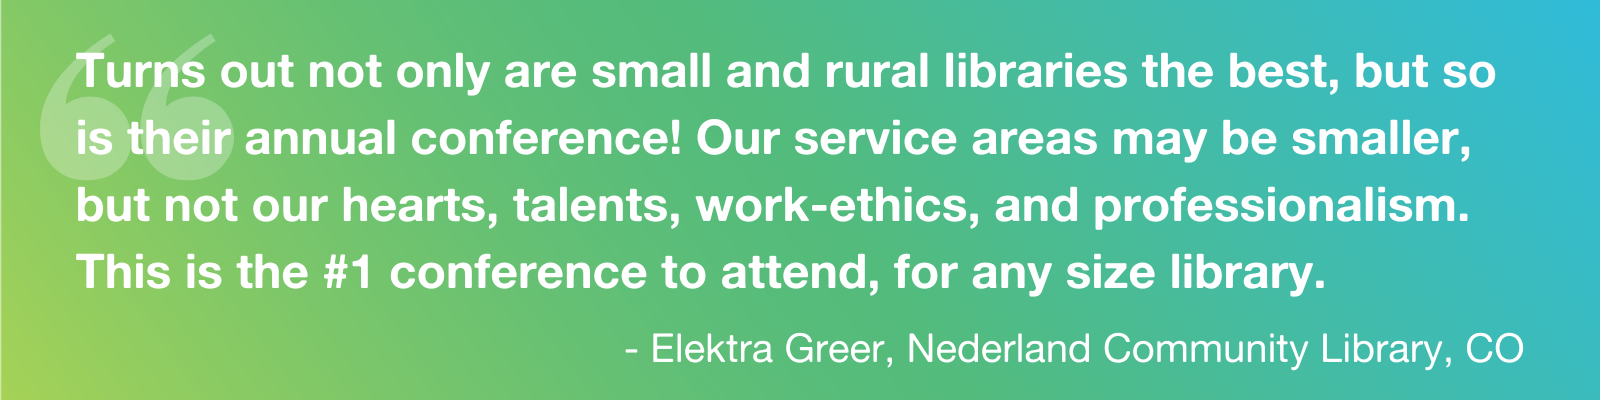 Quote: "Turns out not only are small and rural libraries the best, but so is their annual conference! Our service areas may be smaller, but not our hearts, talents, work-ethics, and professionalism. This is the #1 conference to attend, for any size library." - Elektra Greer, Nederland Community Library, CO